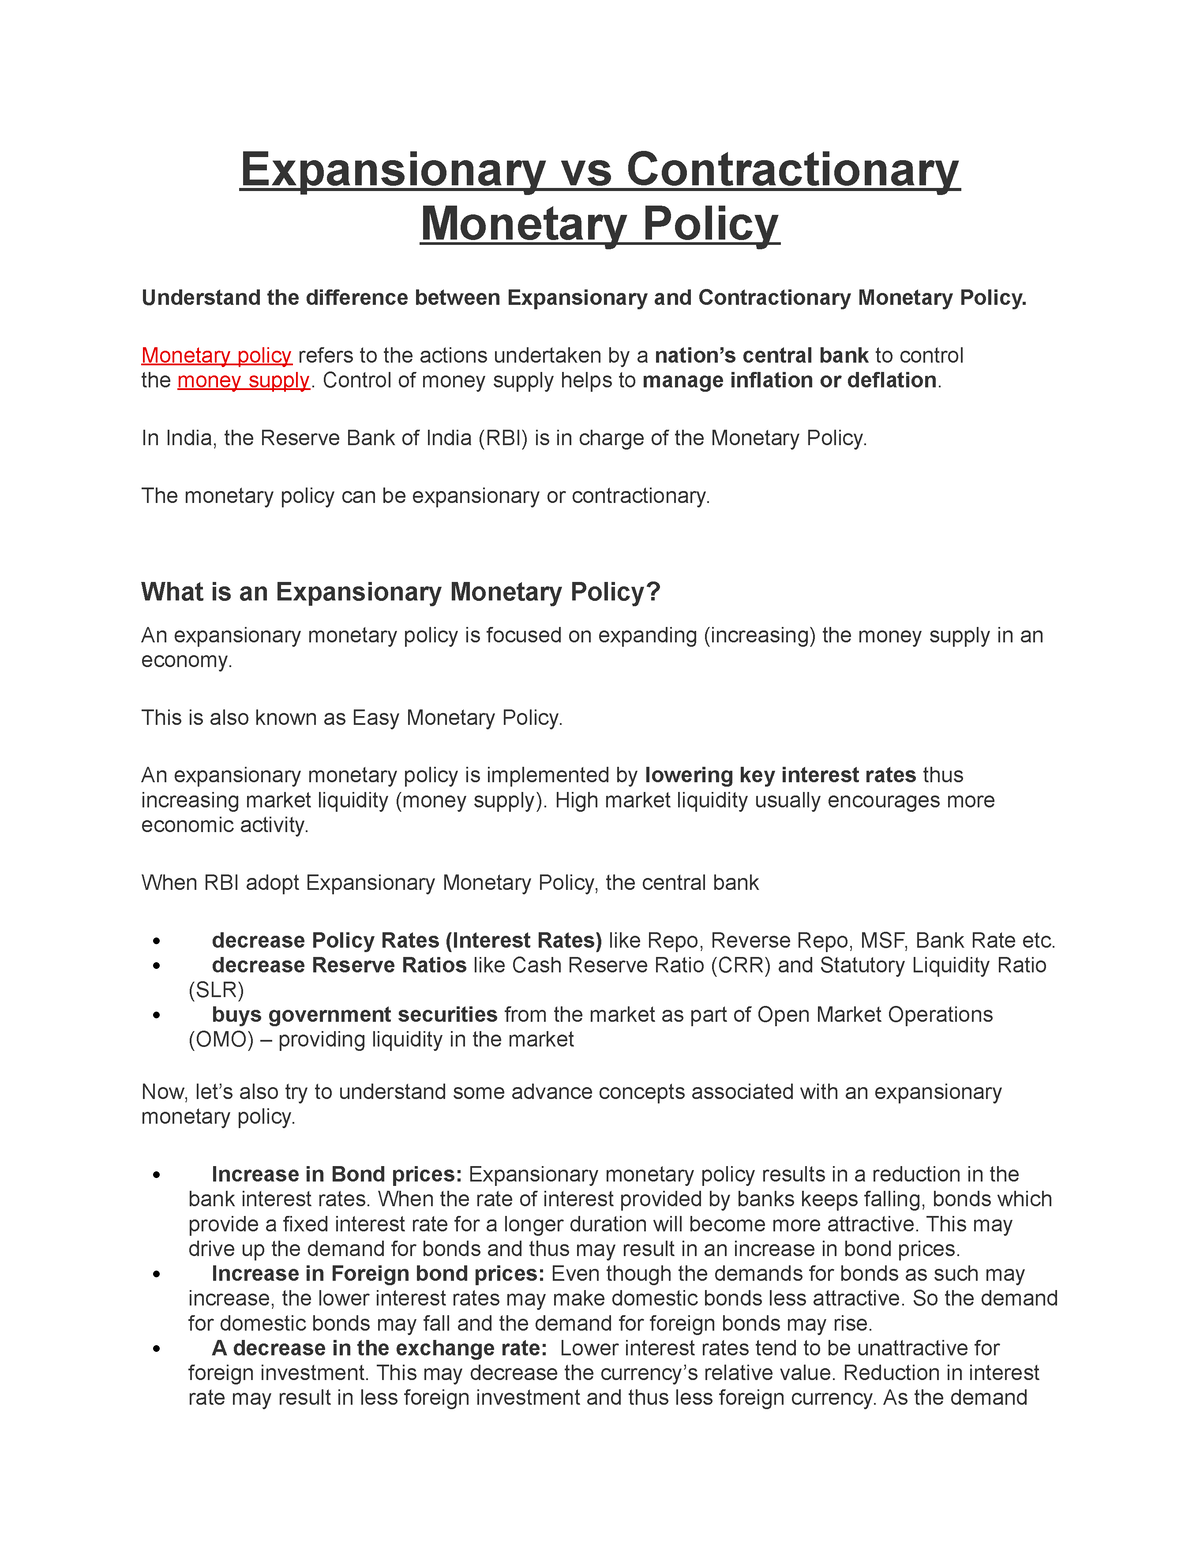 essay about monetary policy